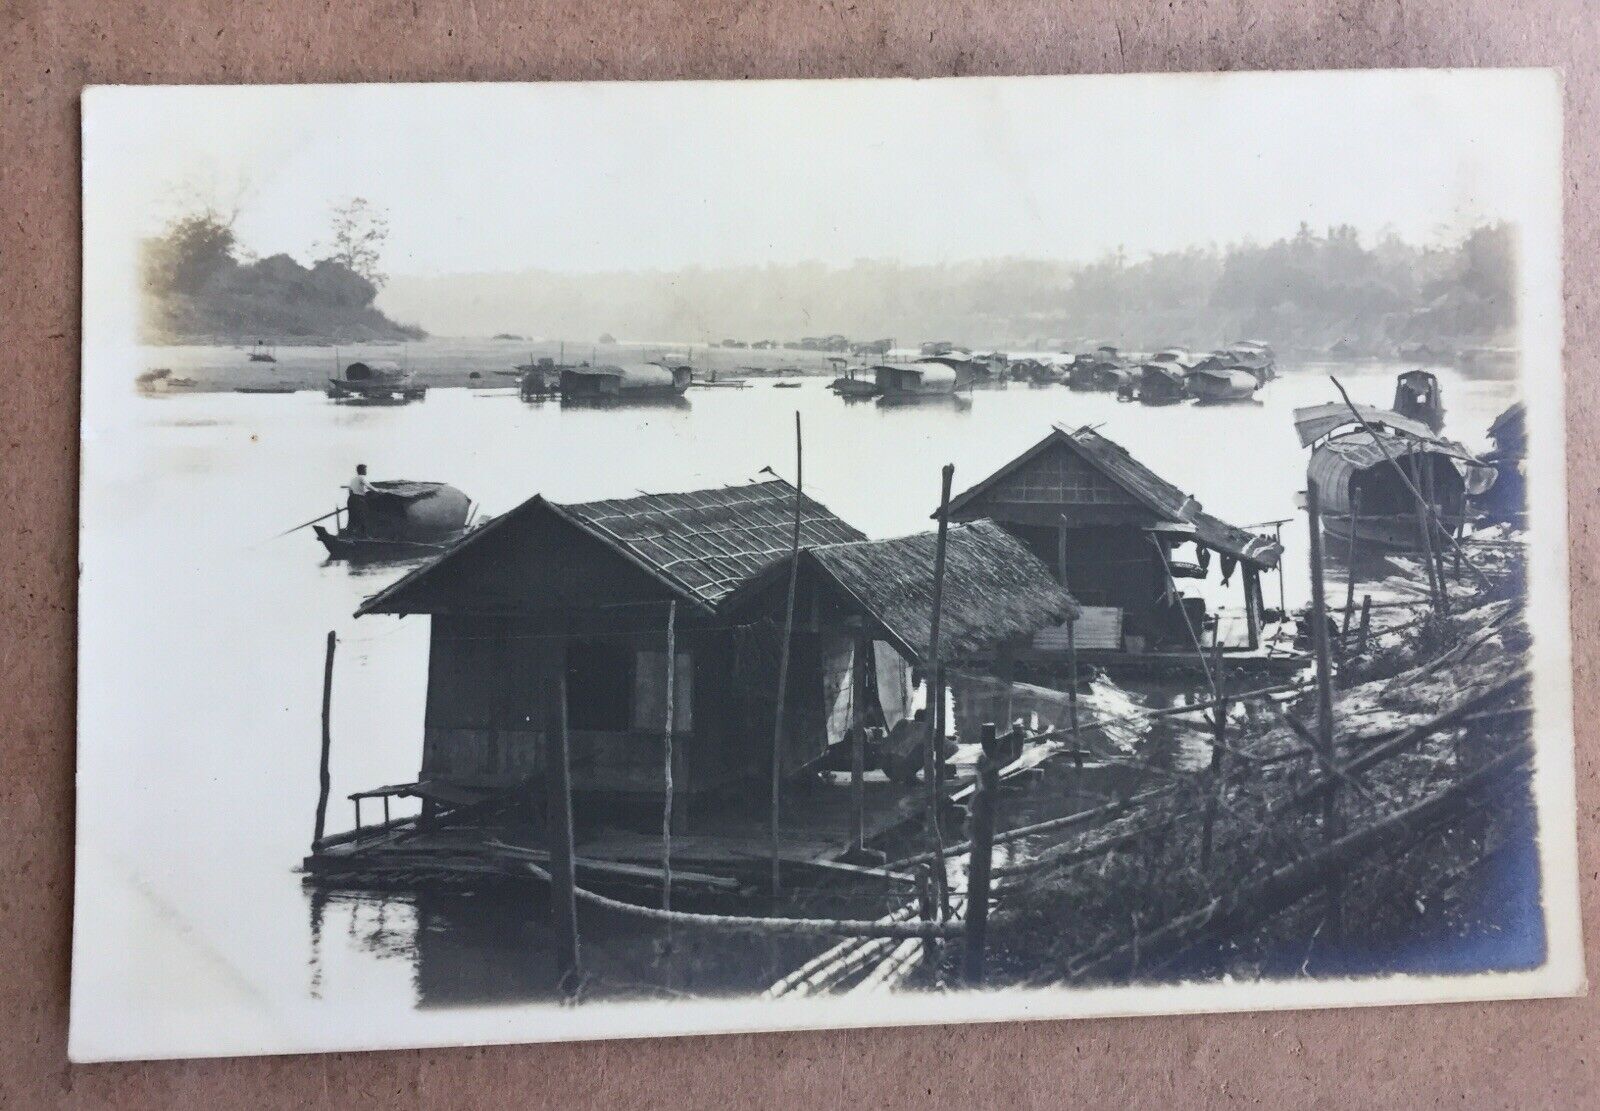 Thailand Postcard Circa 1920s Thai River Scene With House Boats & Rice Barges